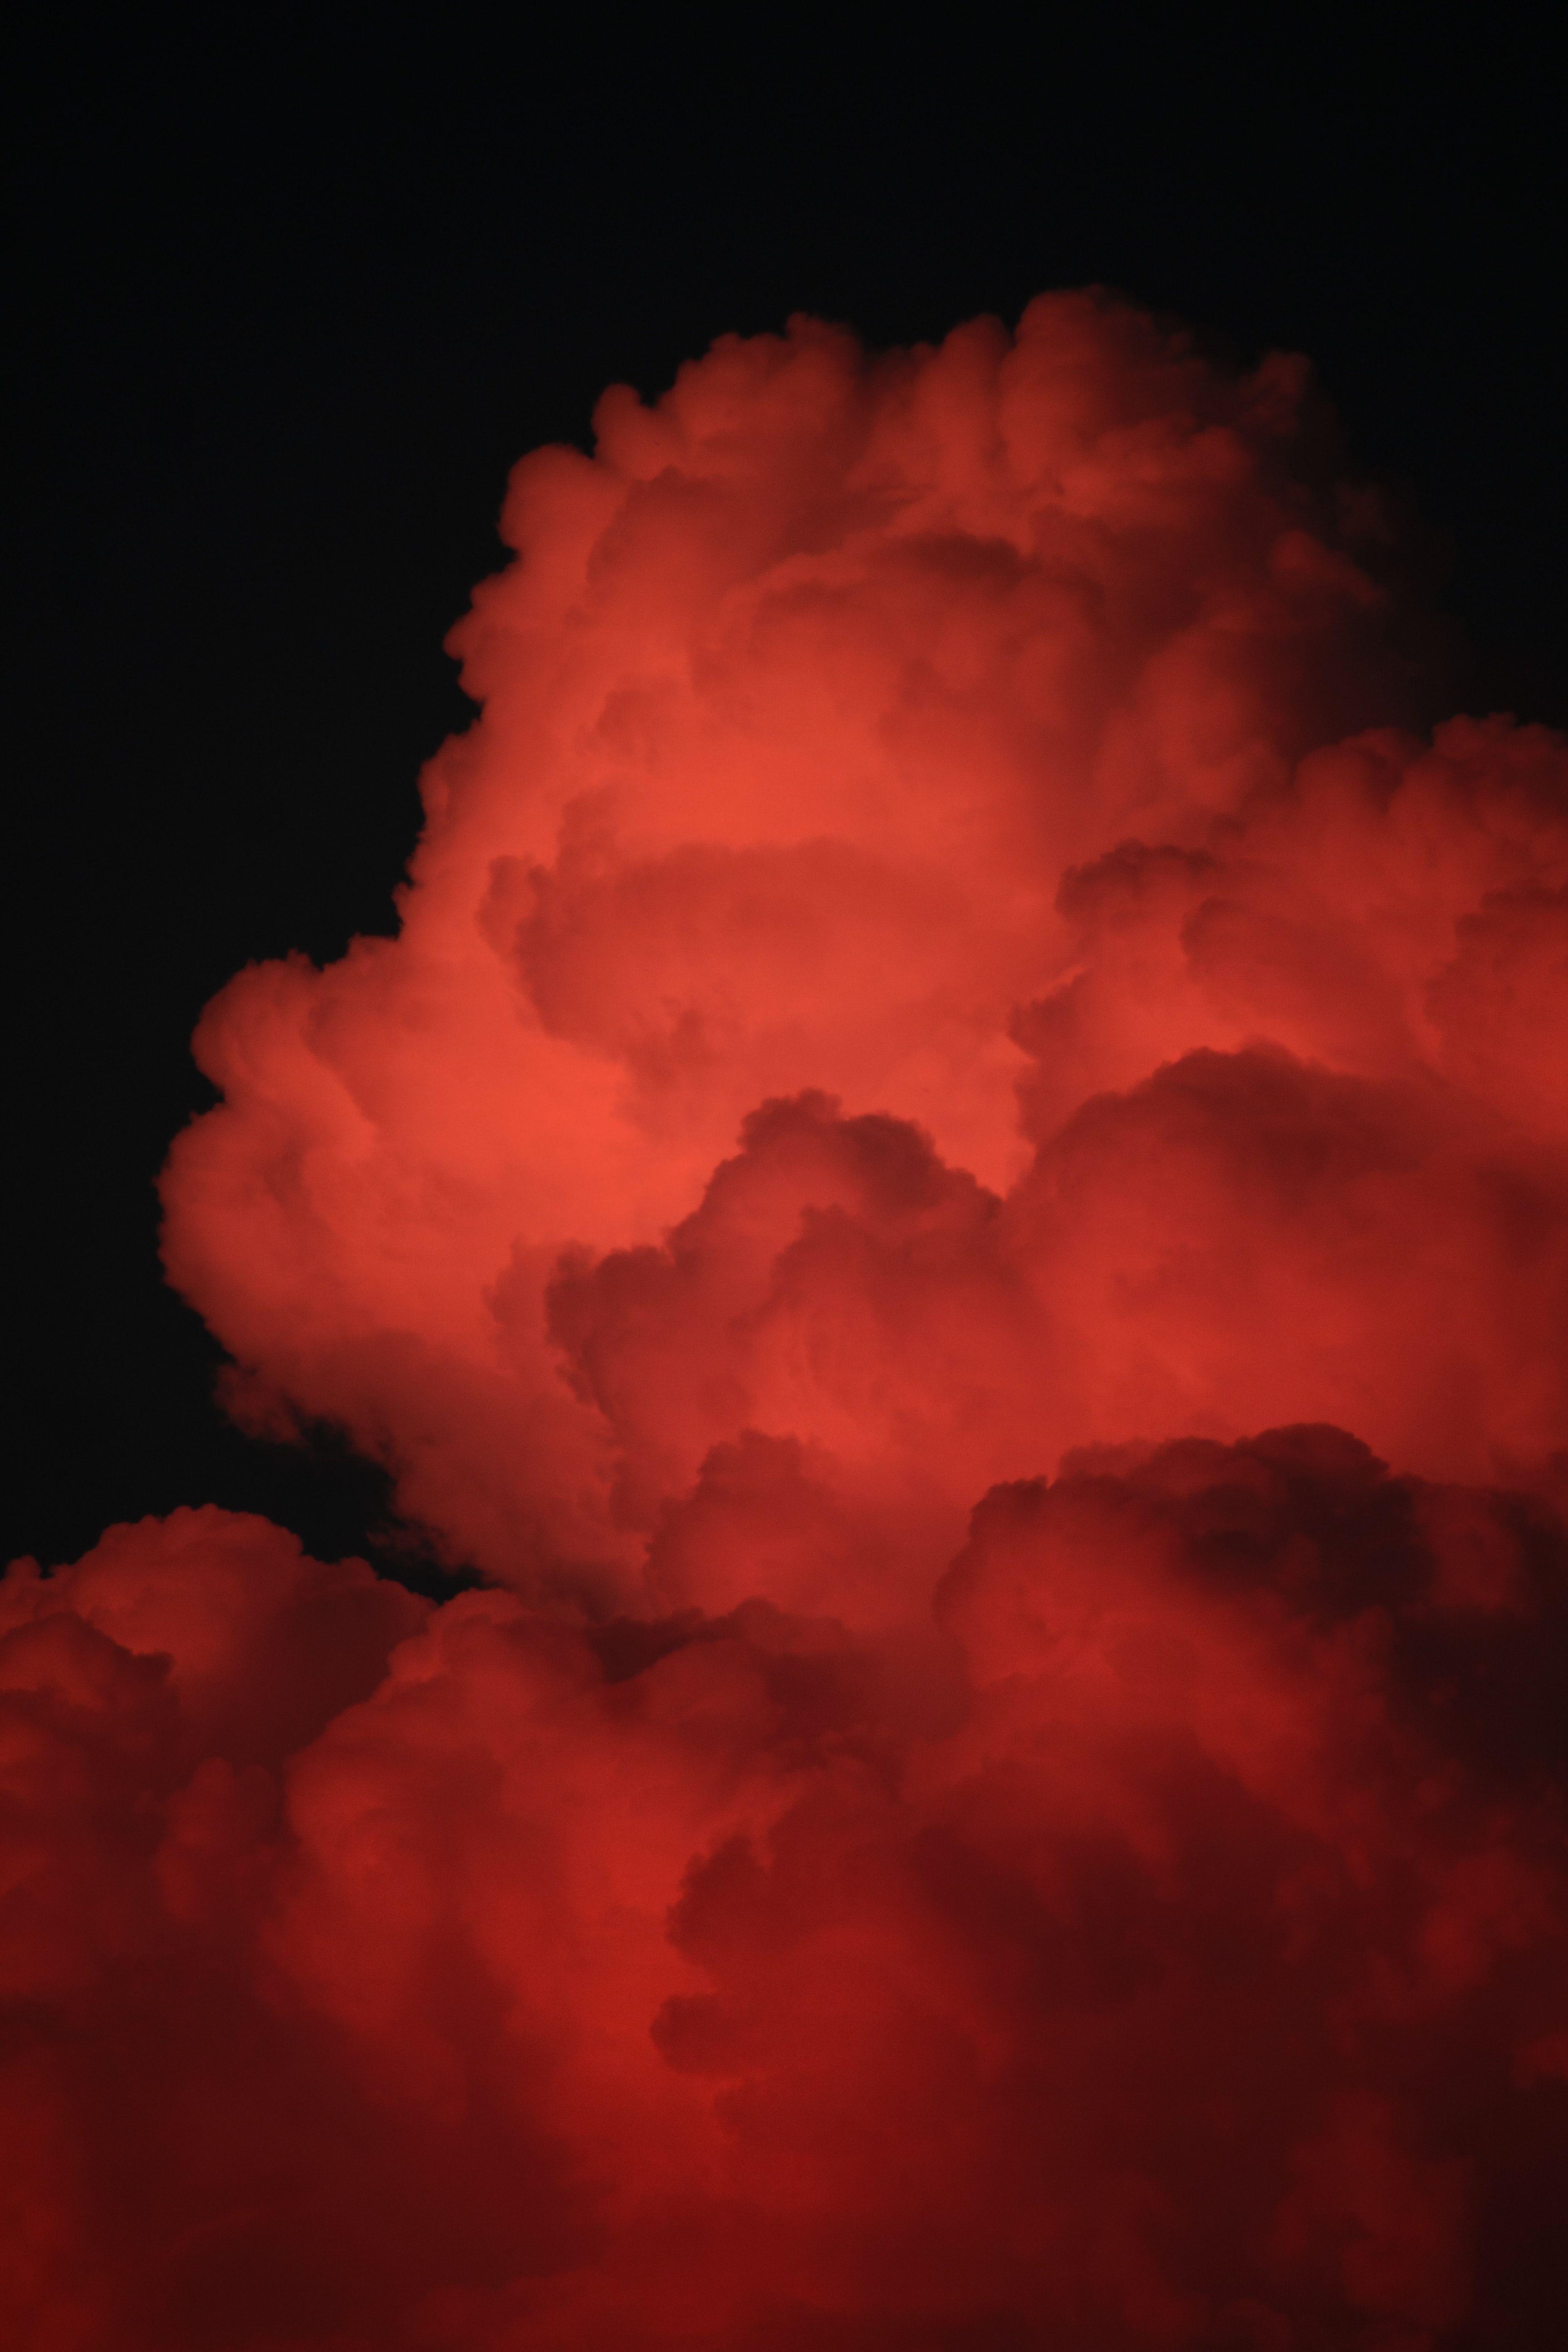 Red Aesthetic Clouds Wallpapers - Top Free Red Aesthetic Clouds ...